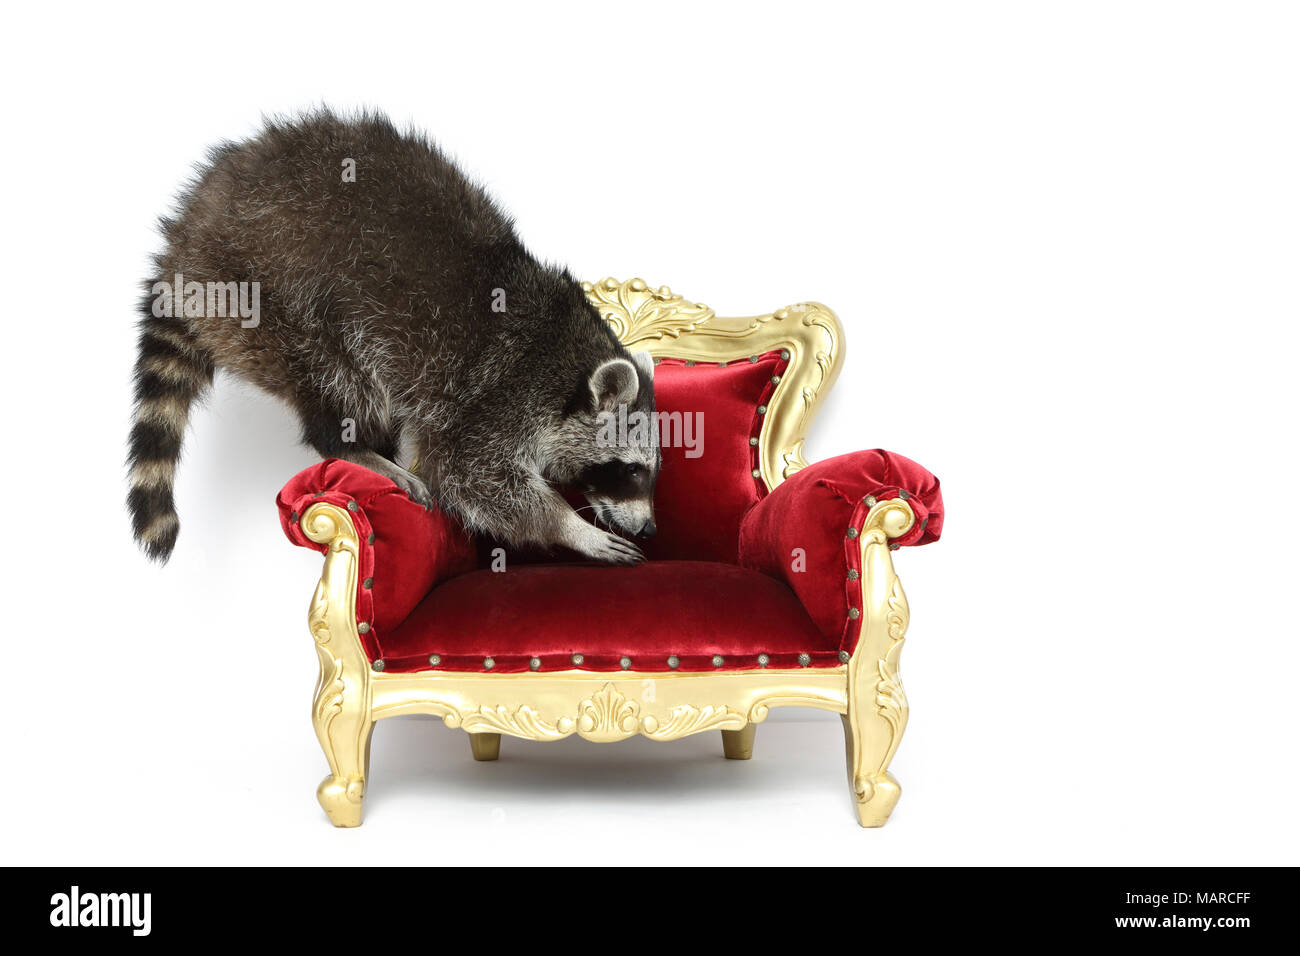 Raccoon (Procyon lotor). Adult climbing on a baroque armchair. Studio picture against a white background. Germany Stock Photo